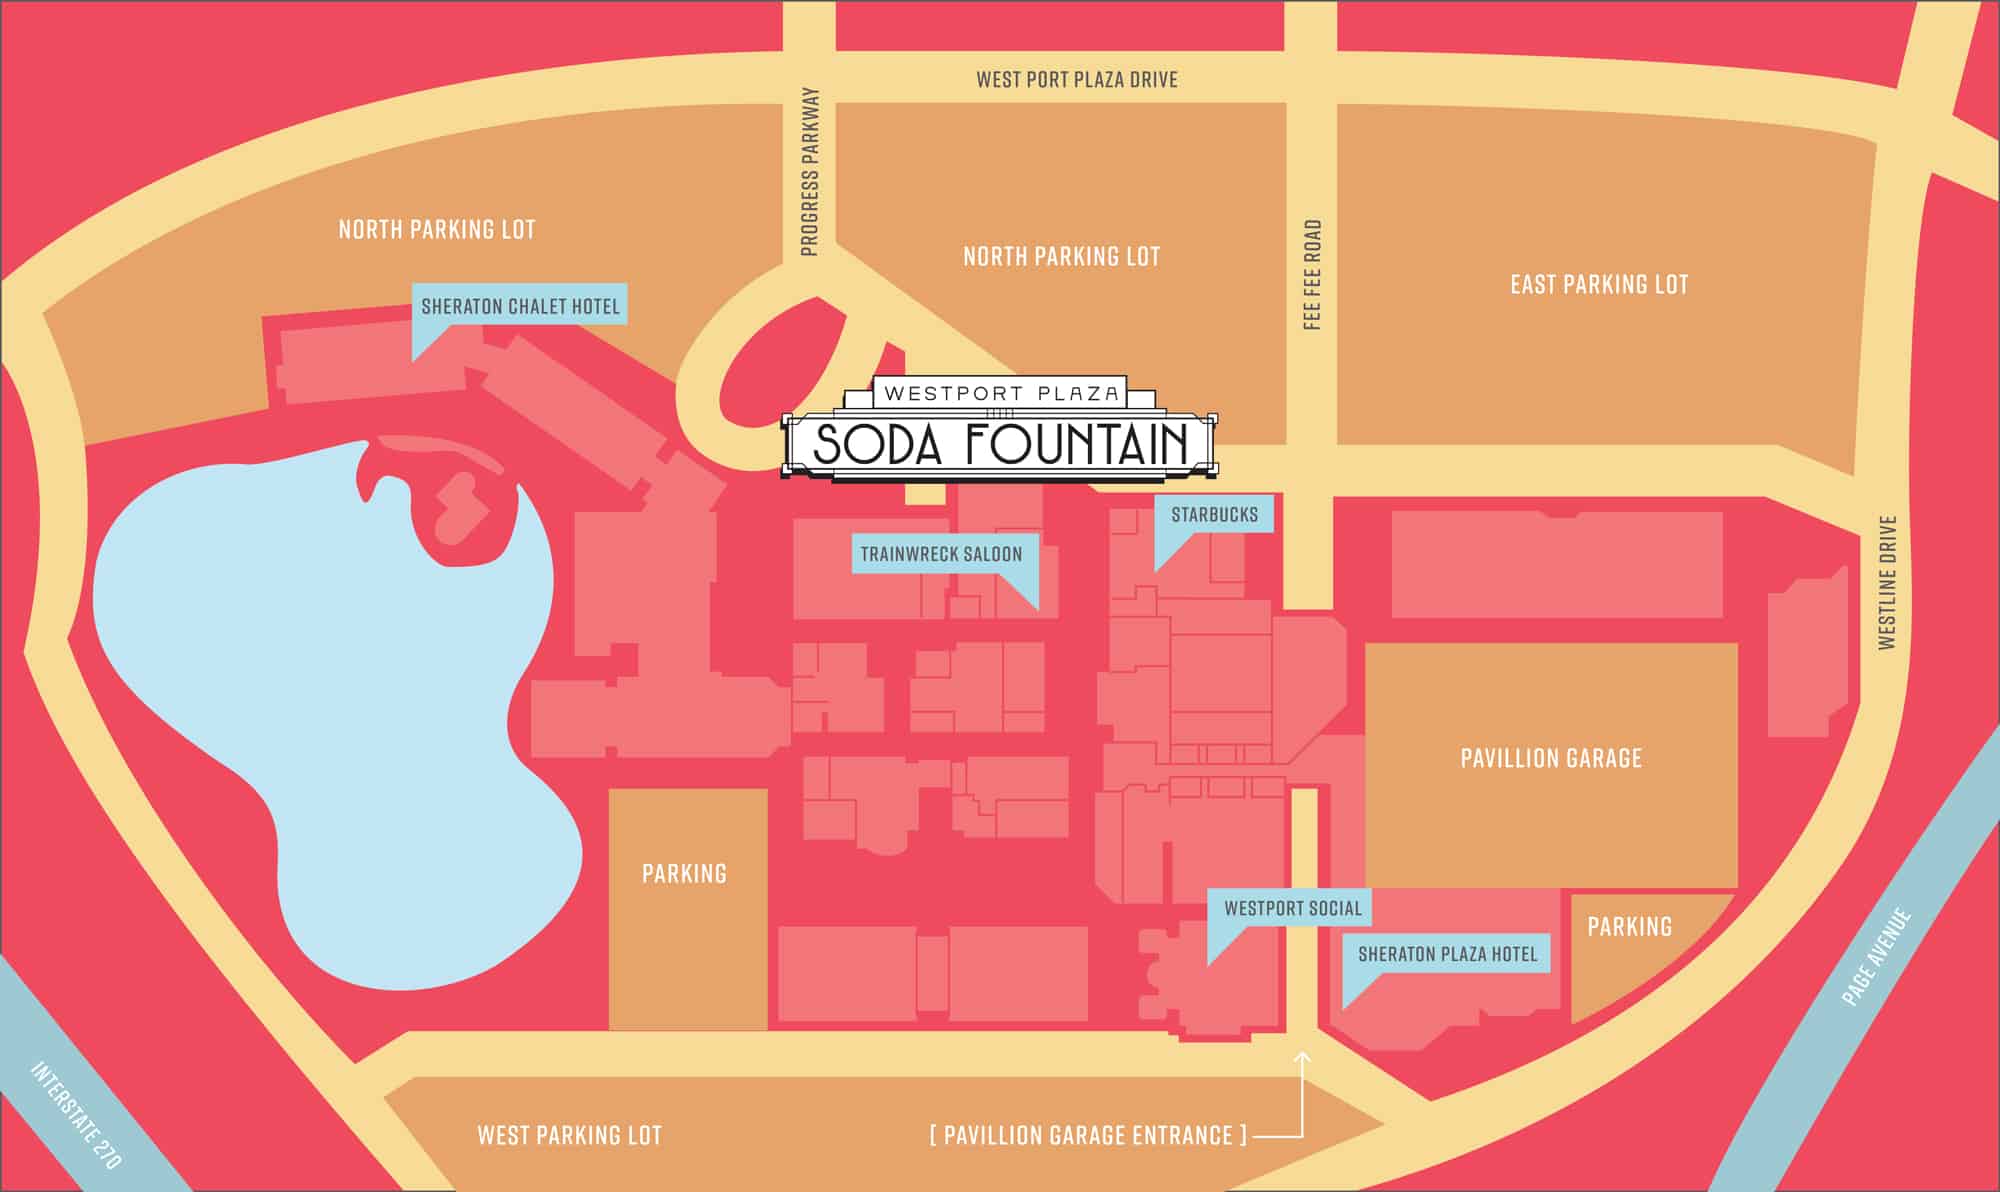 Parking Map For Soda Fountain Express at Westport Plaza